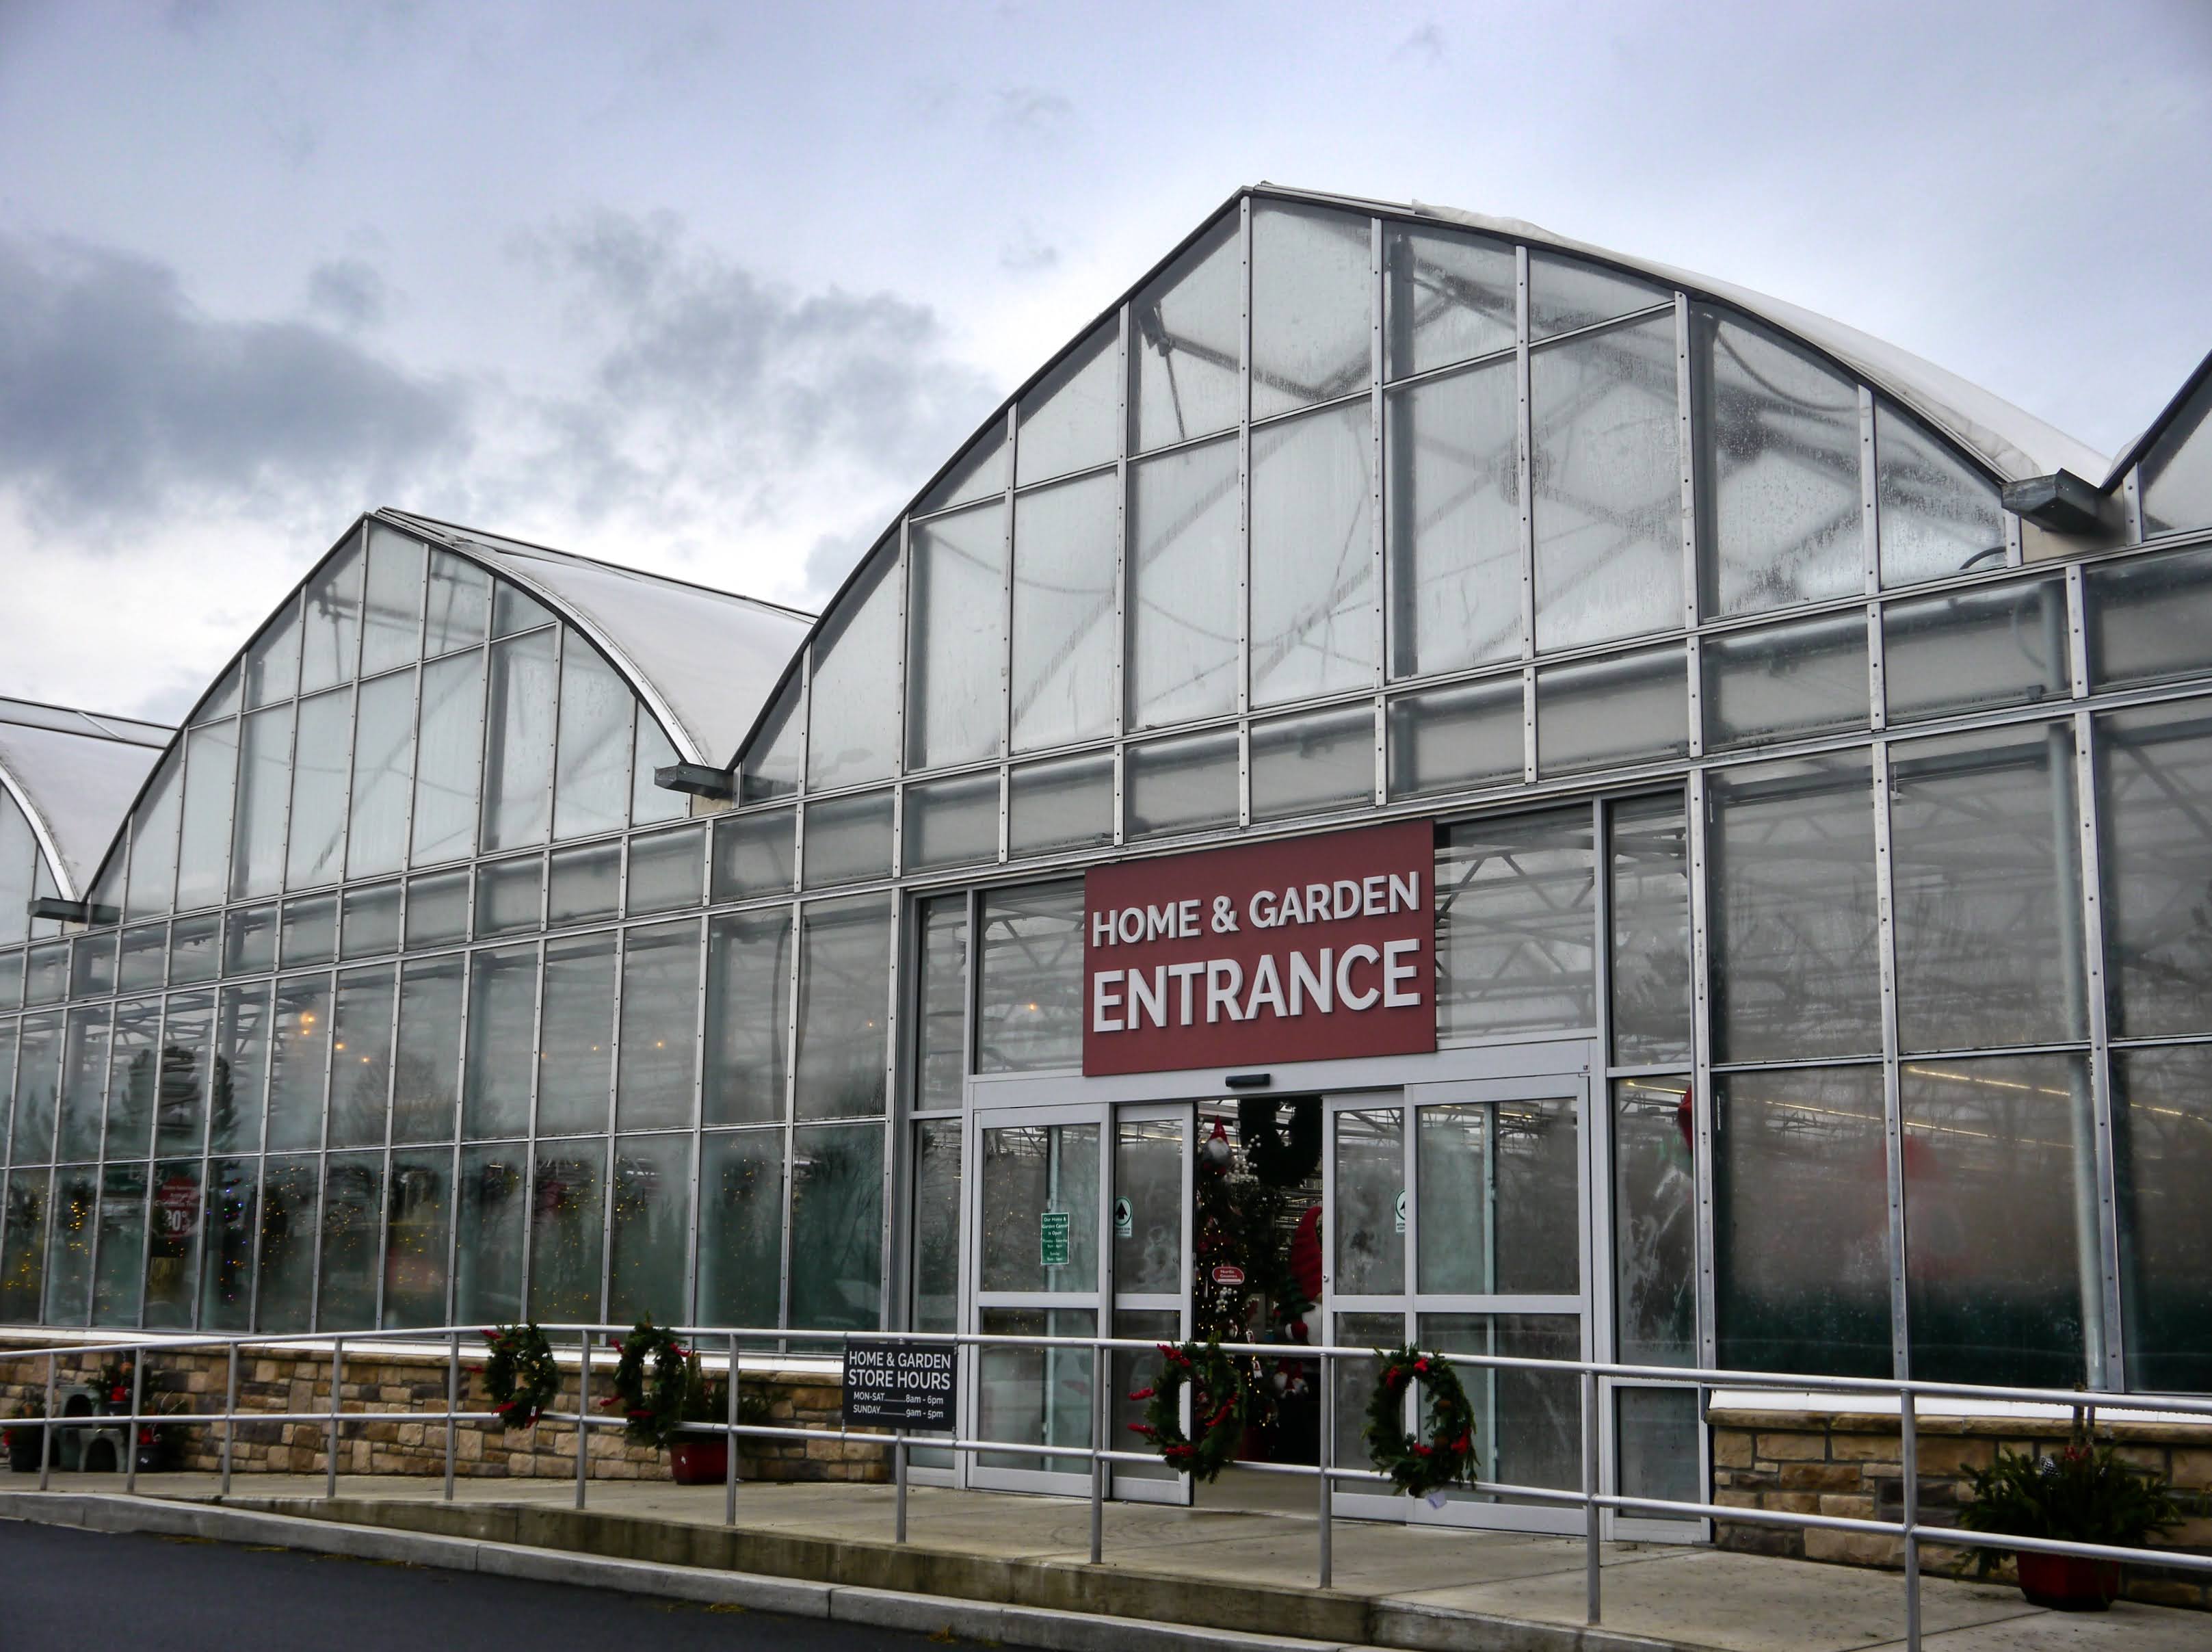 Retail greenhouse aesthetic to earn money attracting more customers